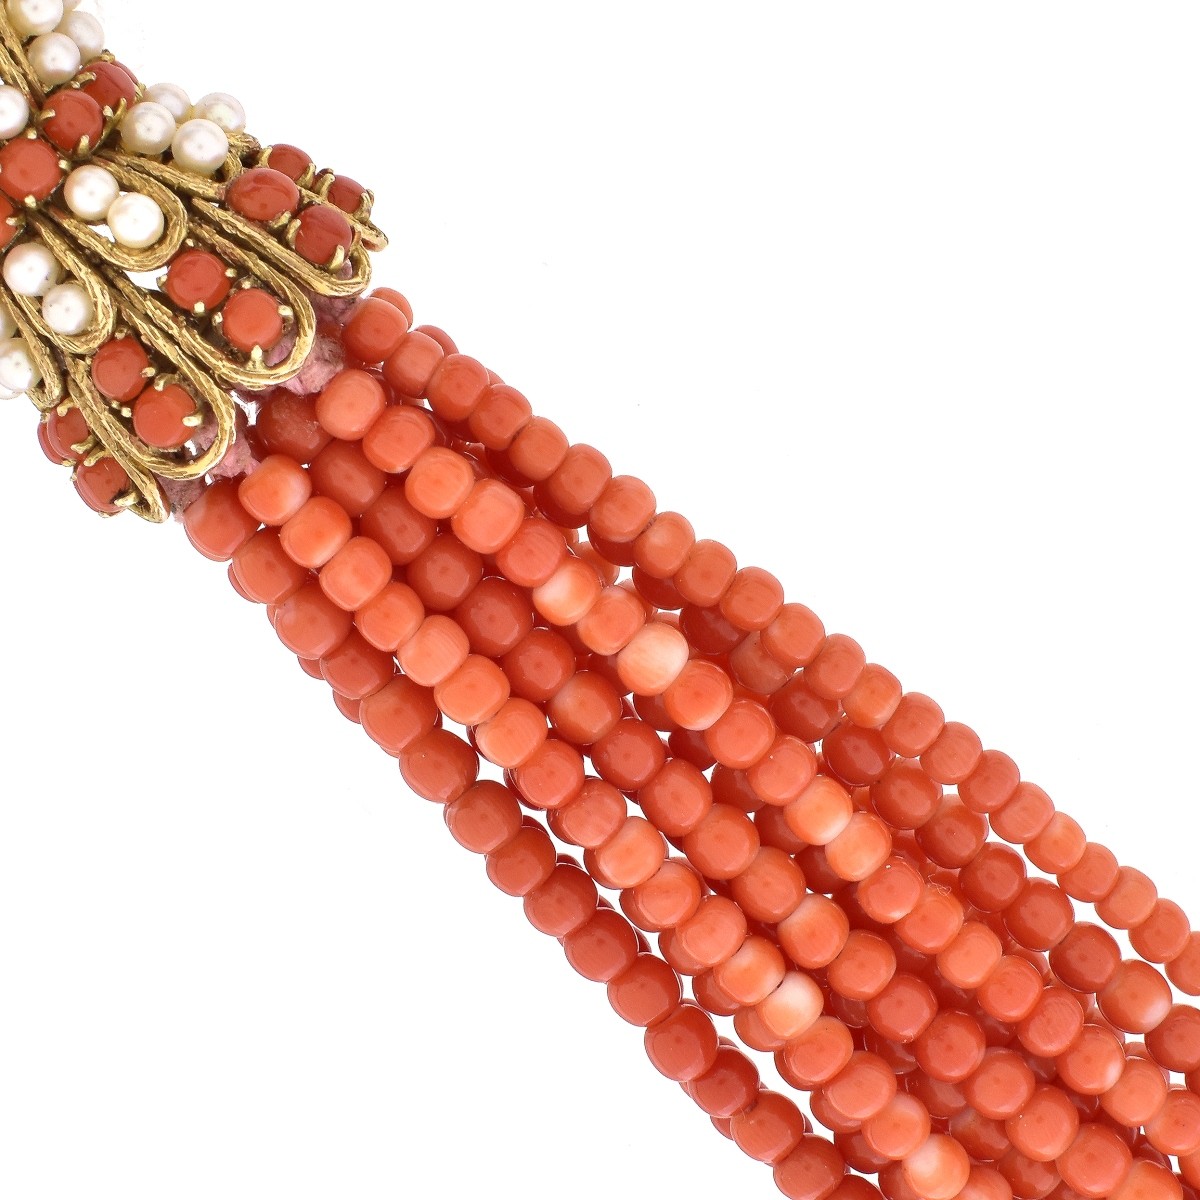 Coral Bead and 14K Gold Bracelet